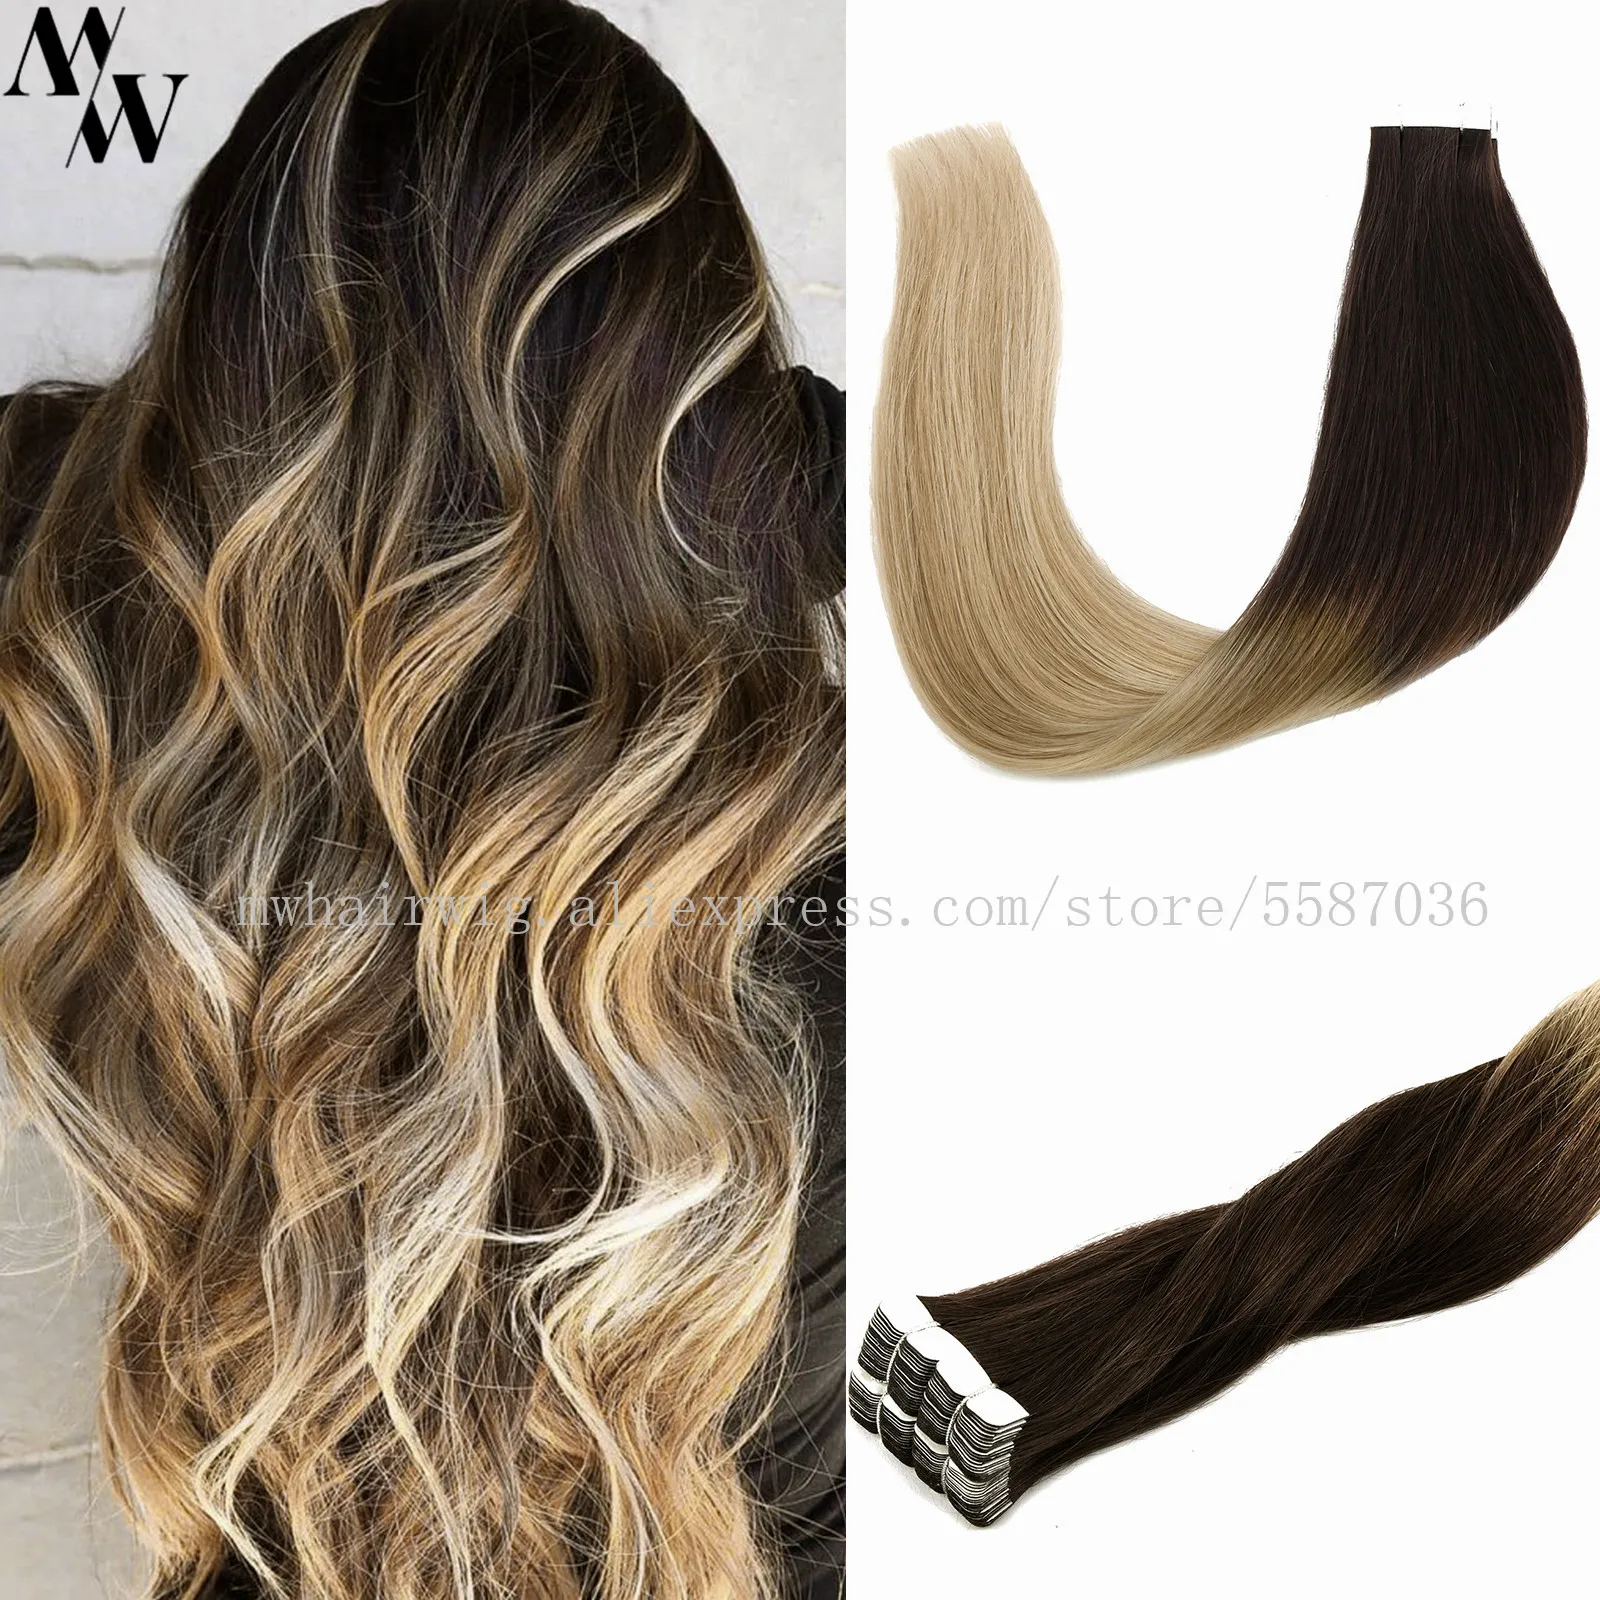 

MW Natural Straight Tape in Hair Extension Balayage Ombre Machine Remy Real Human Hair for Women Invisible Seamless PU Skin Weft